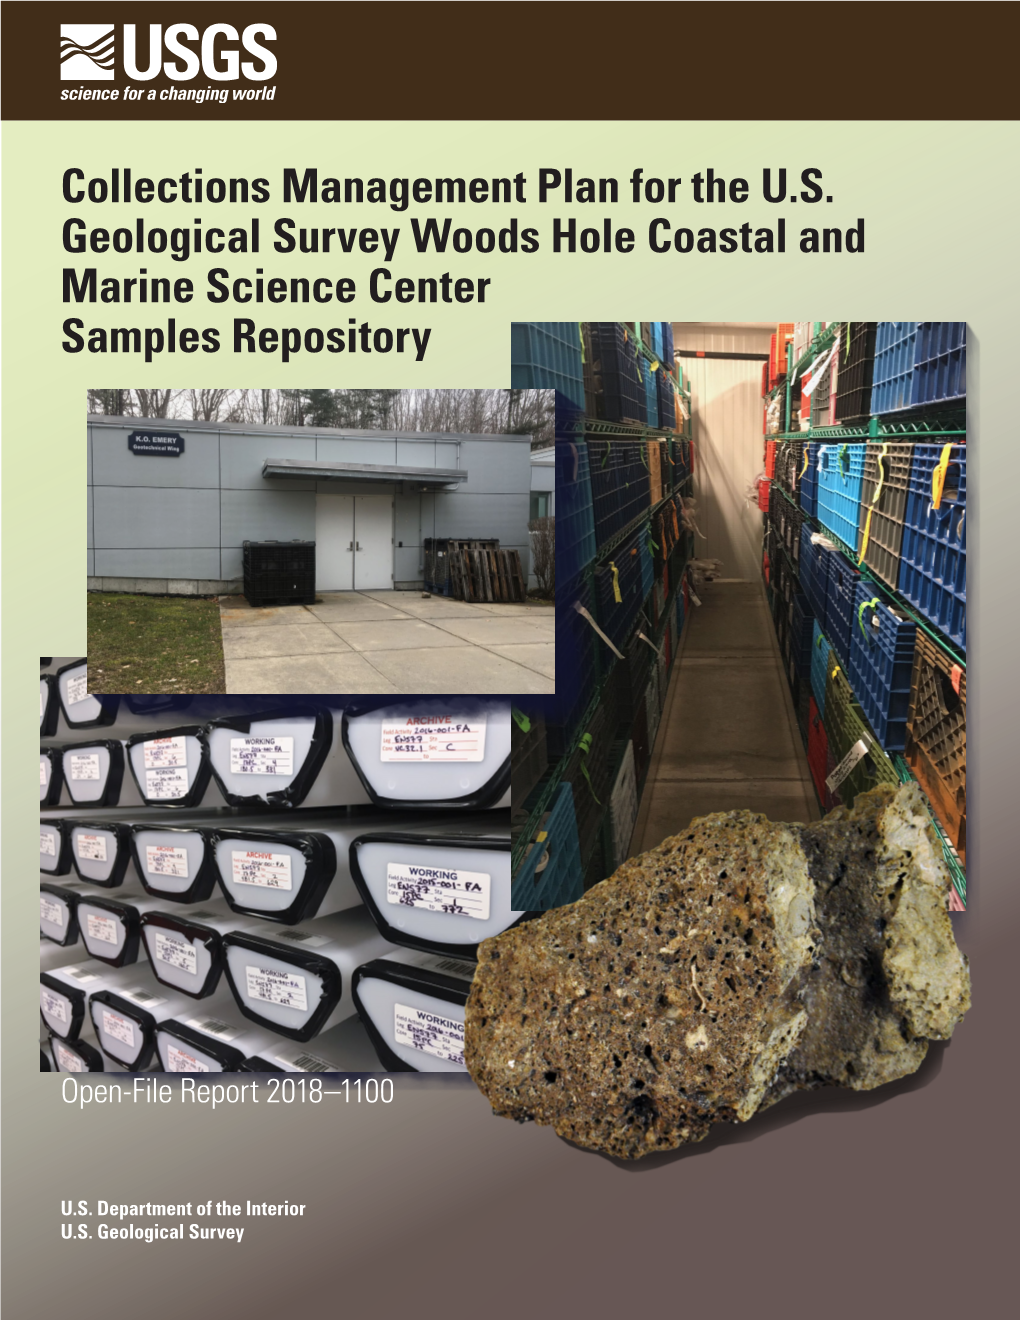 Collections Management Plan for the U.S. Geological Survey Woods Hole Coastal and Marine Science Center Samples Repository